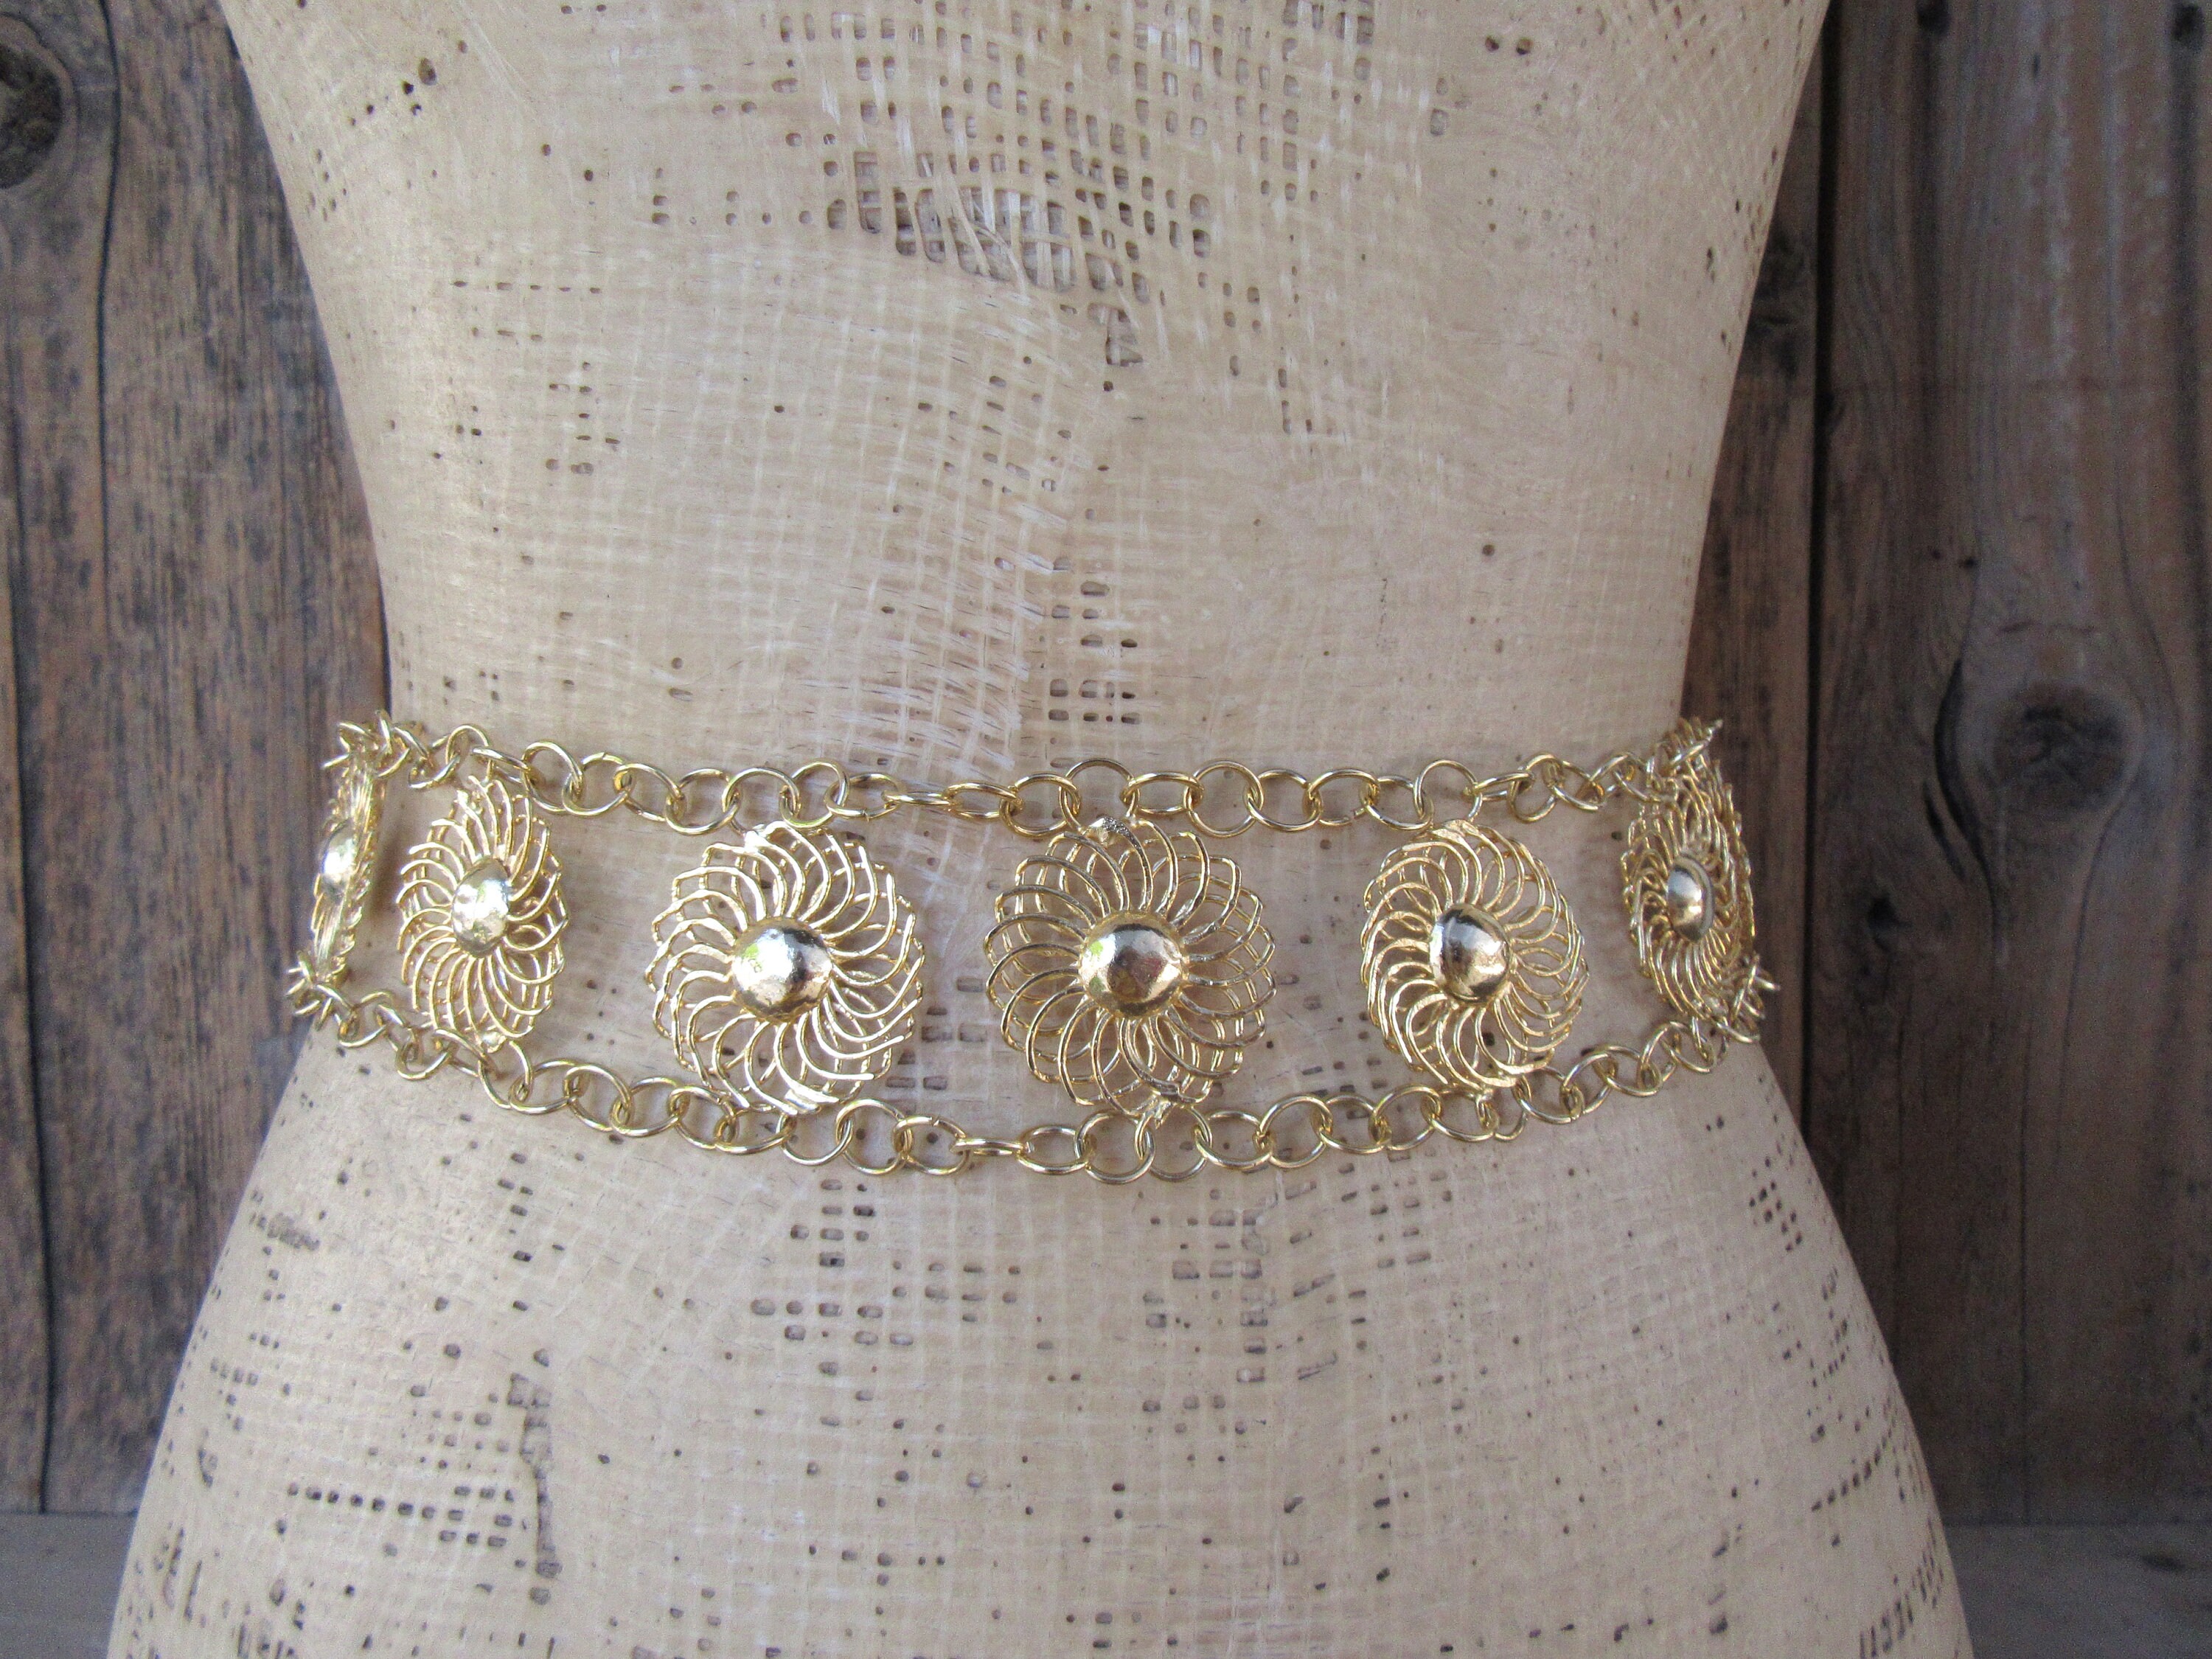 Chanel Style Leather Entwined Chain Belt with Lock Detail